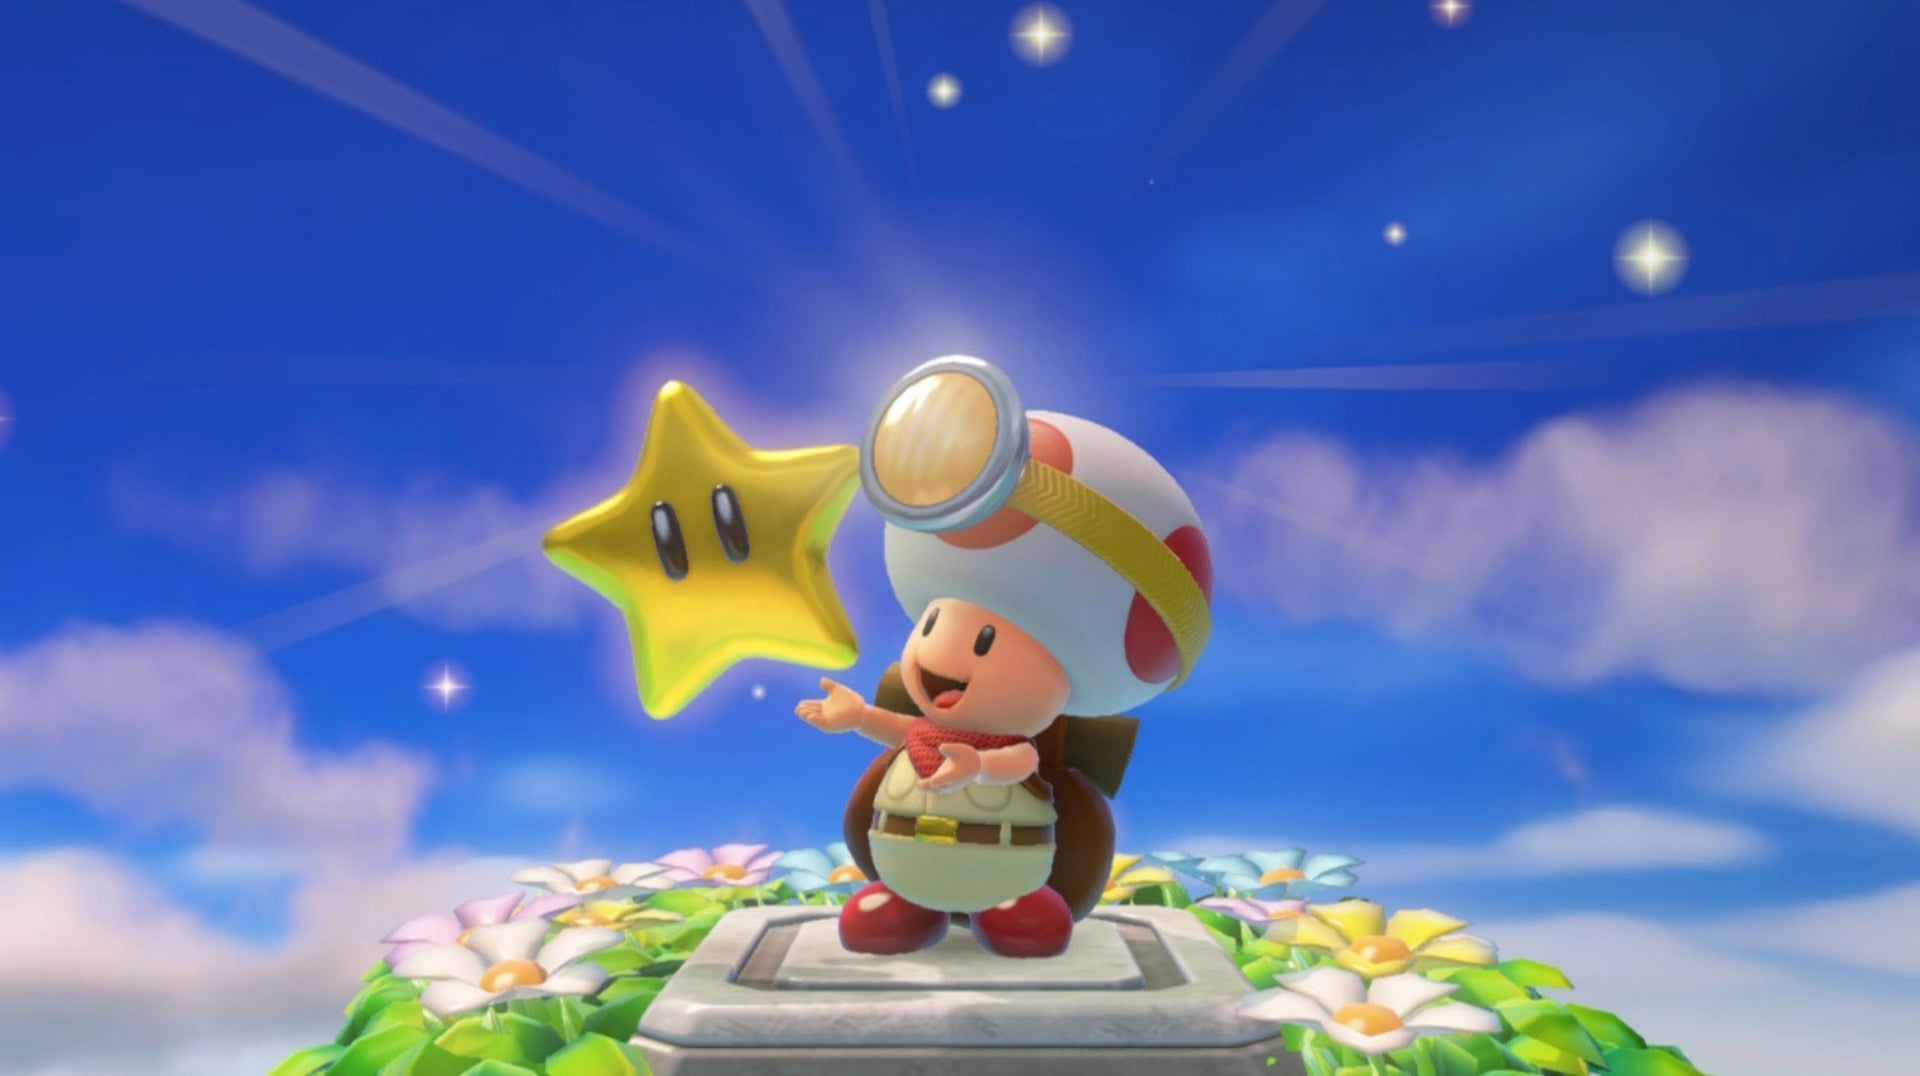 Image for Captain Toad walkthrough - Gem locations, Star locations and tips in Treasure Tracker